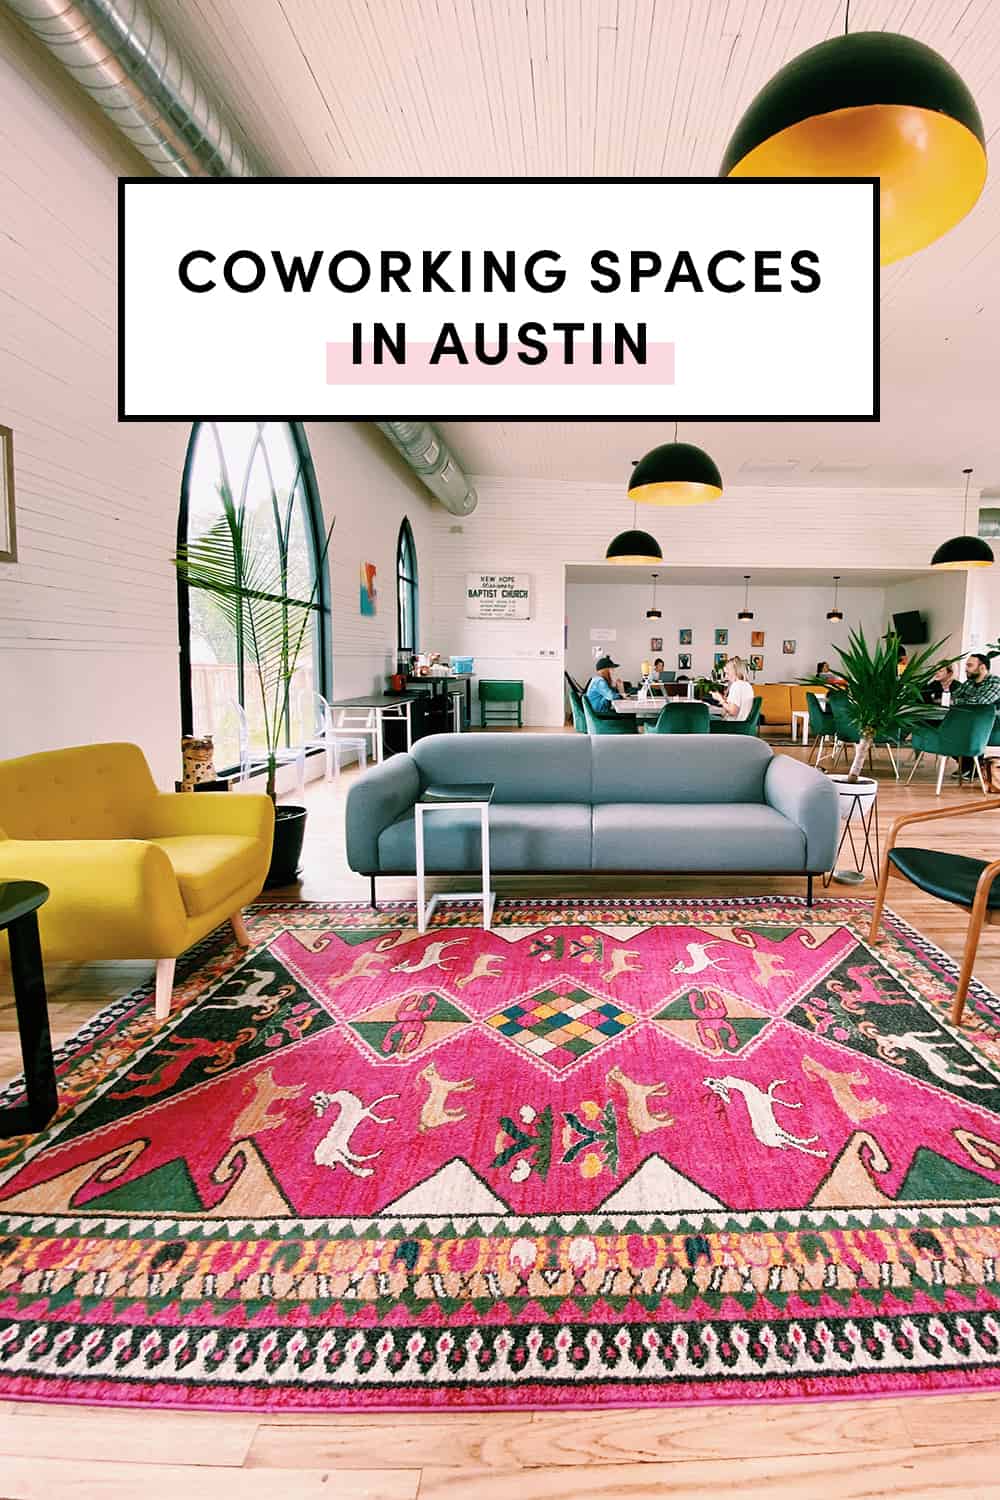 Coworking Spaces in Austin